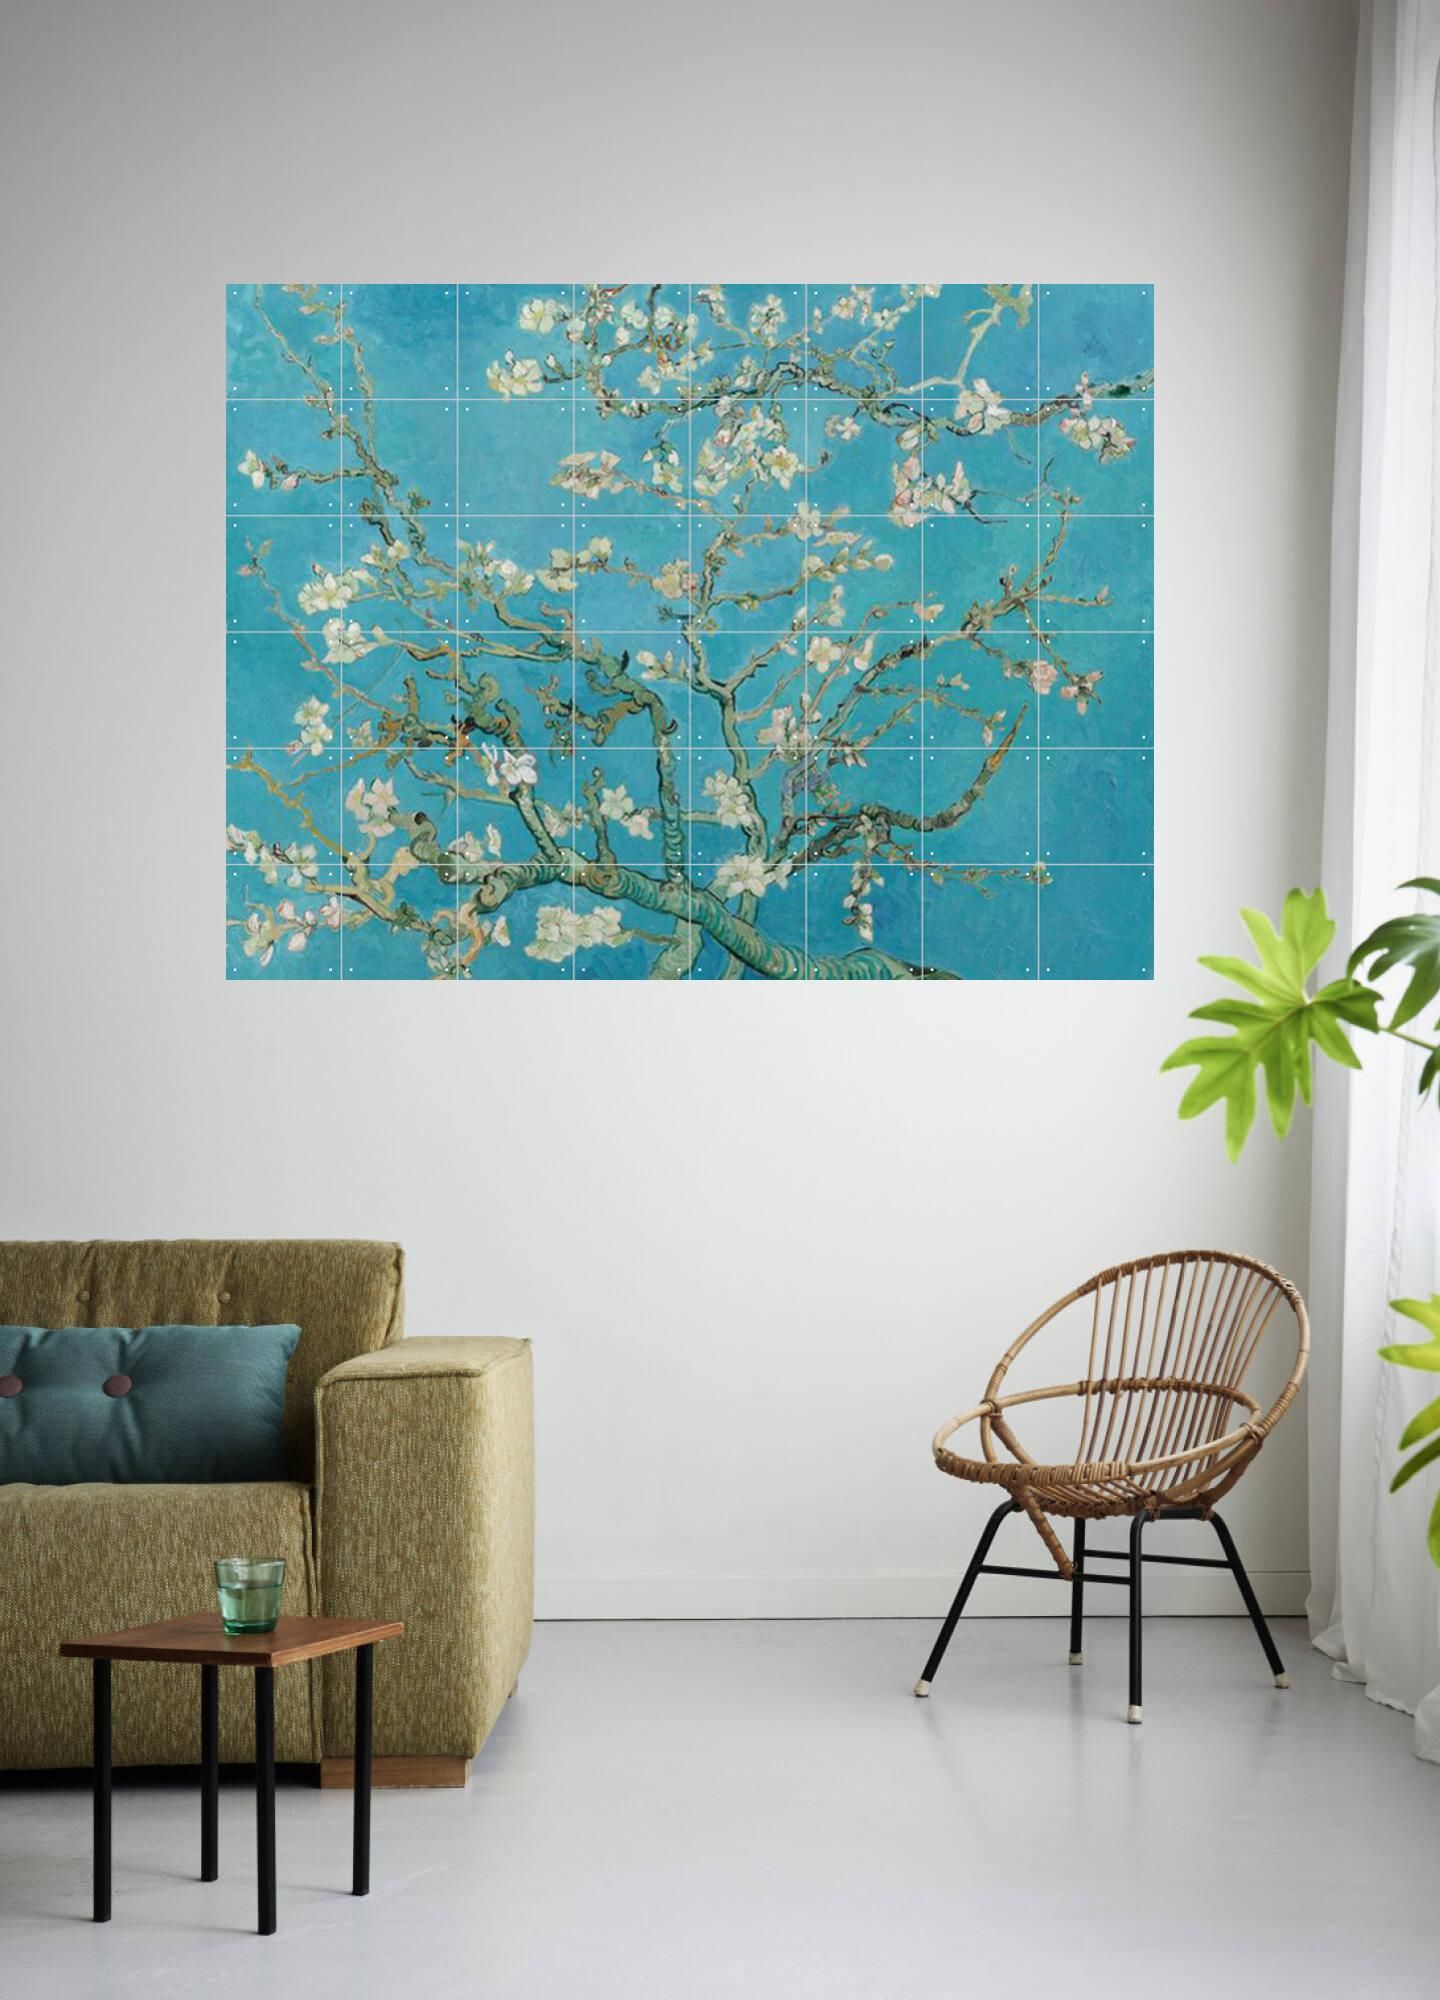 Almond Blossom – Ixxi Intended For Most Recent Almond Blossoms Wall Art (View 18 of 20)